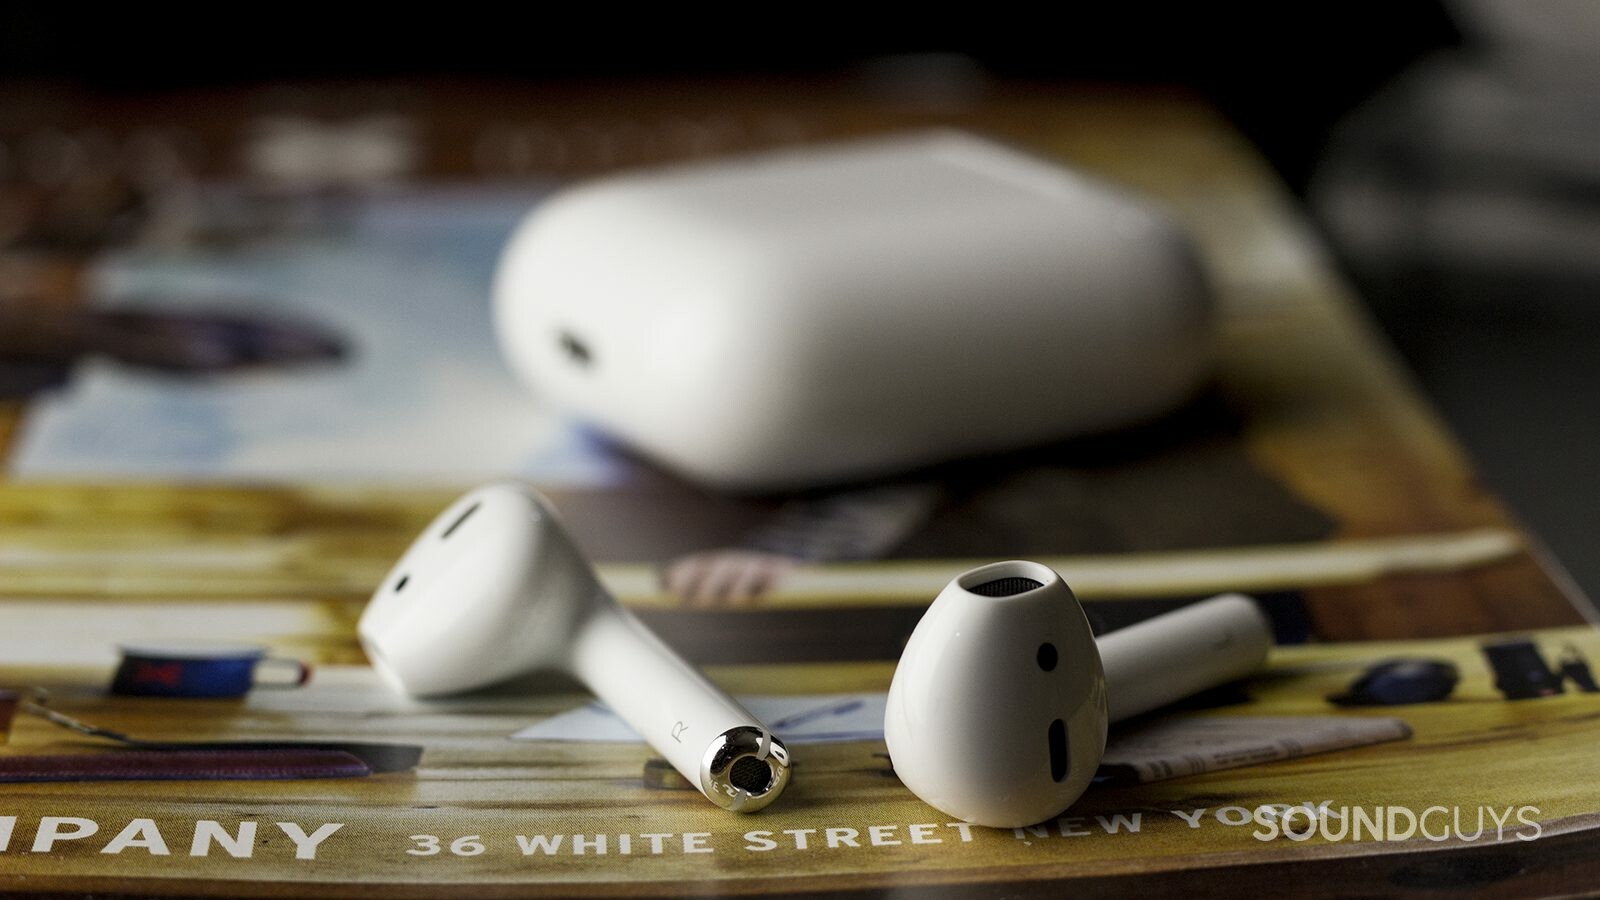 The Apple AirPods true wireless earbuds outside of the charging case.